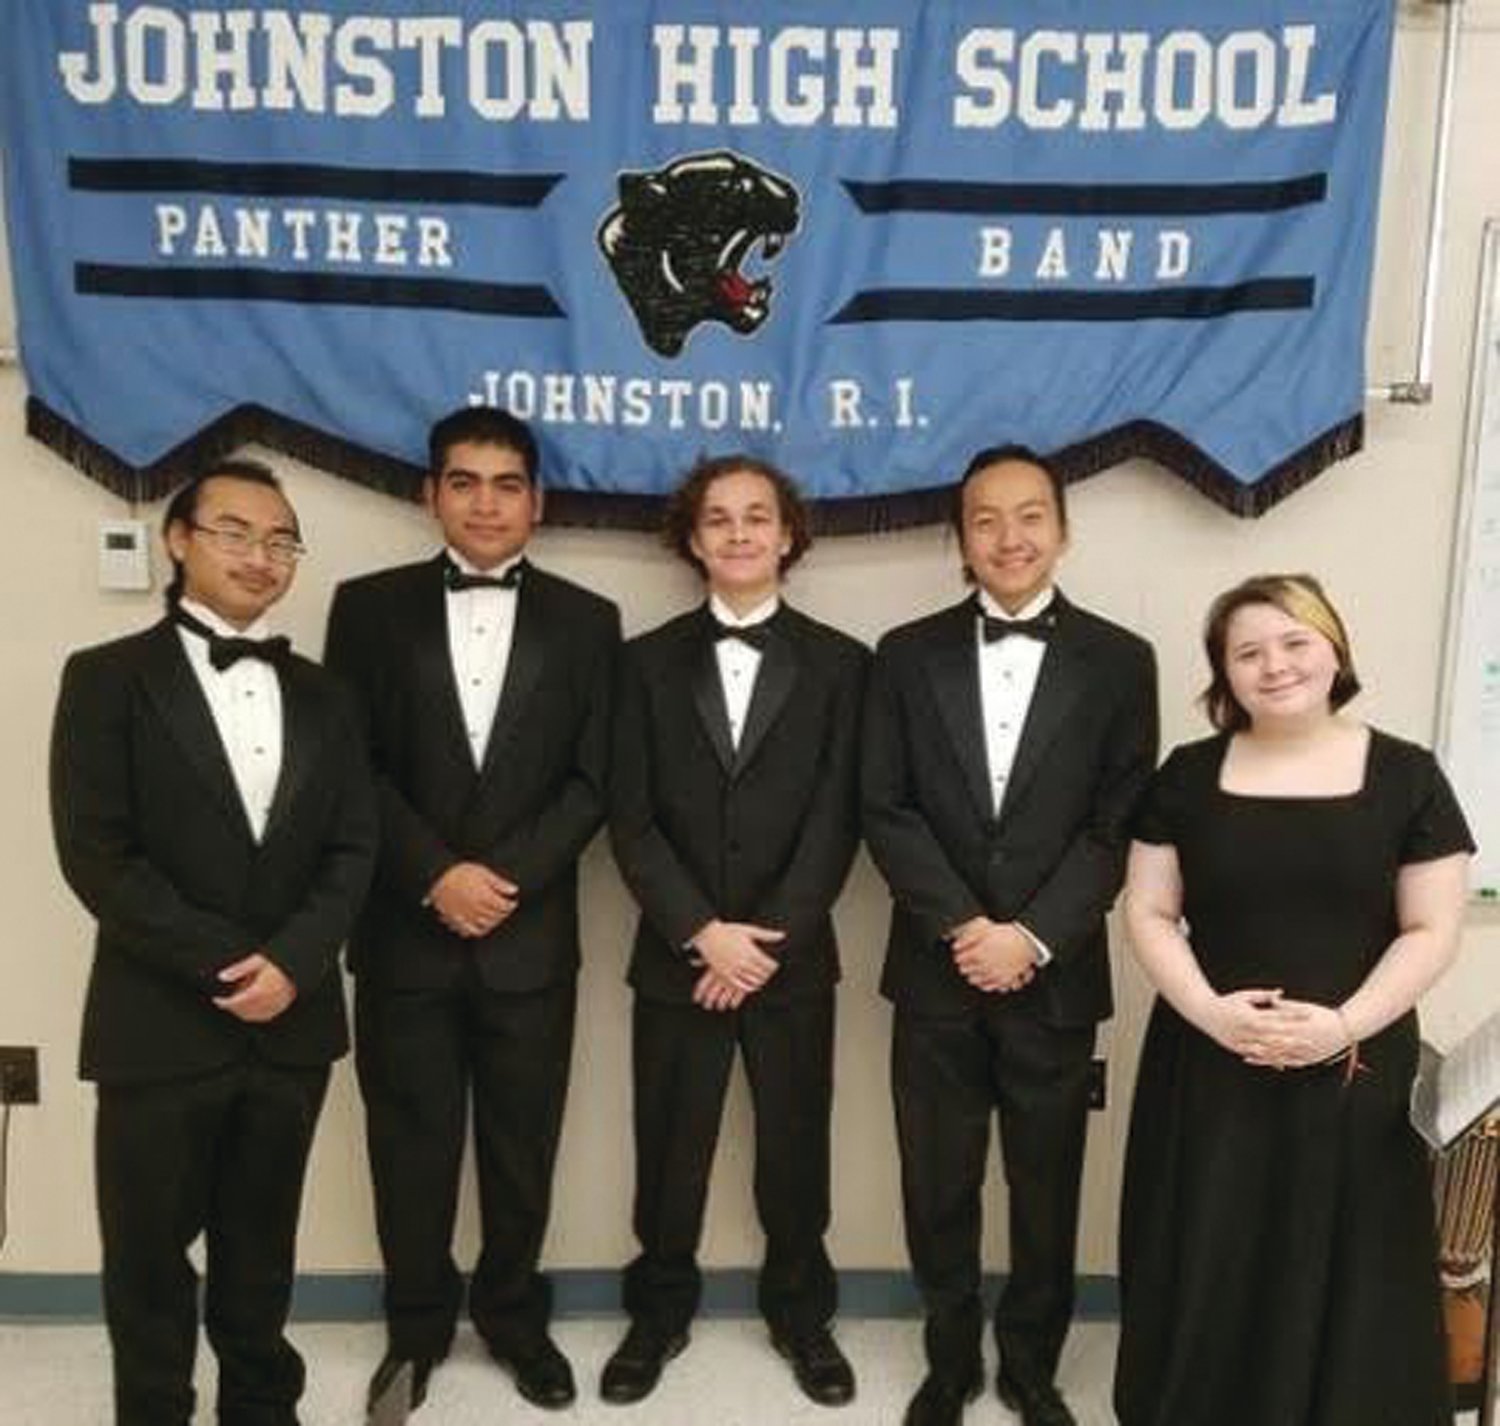 VALUABLE VOCALISTS: Risca Soth, Joshua Galeas, Willson El Hague, Fuji Kane and Samantha DiMaio were among the talented student vocalists who treated an audience of 250 people plus to a Christmas Concert extraordinaire.